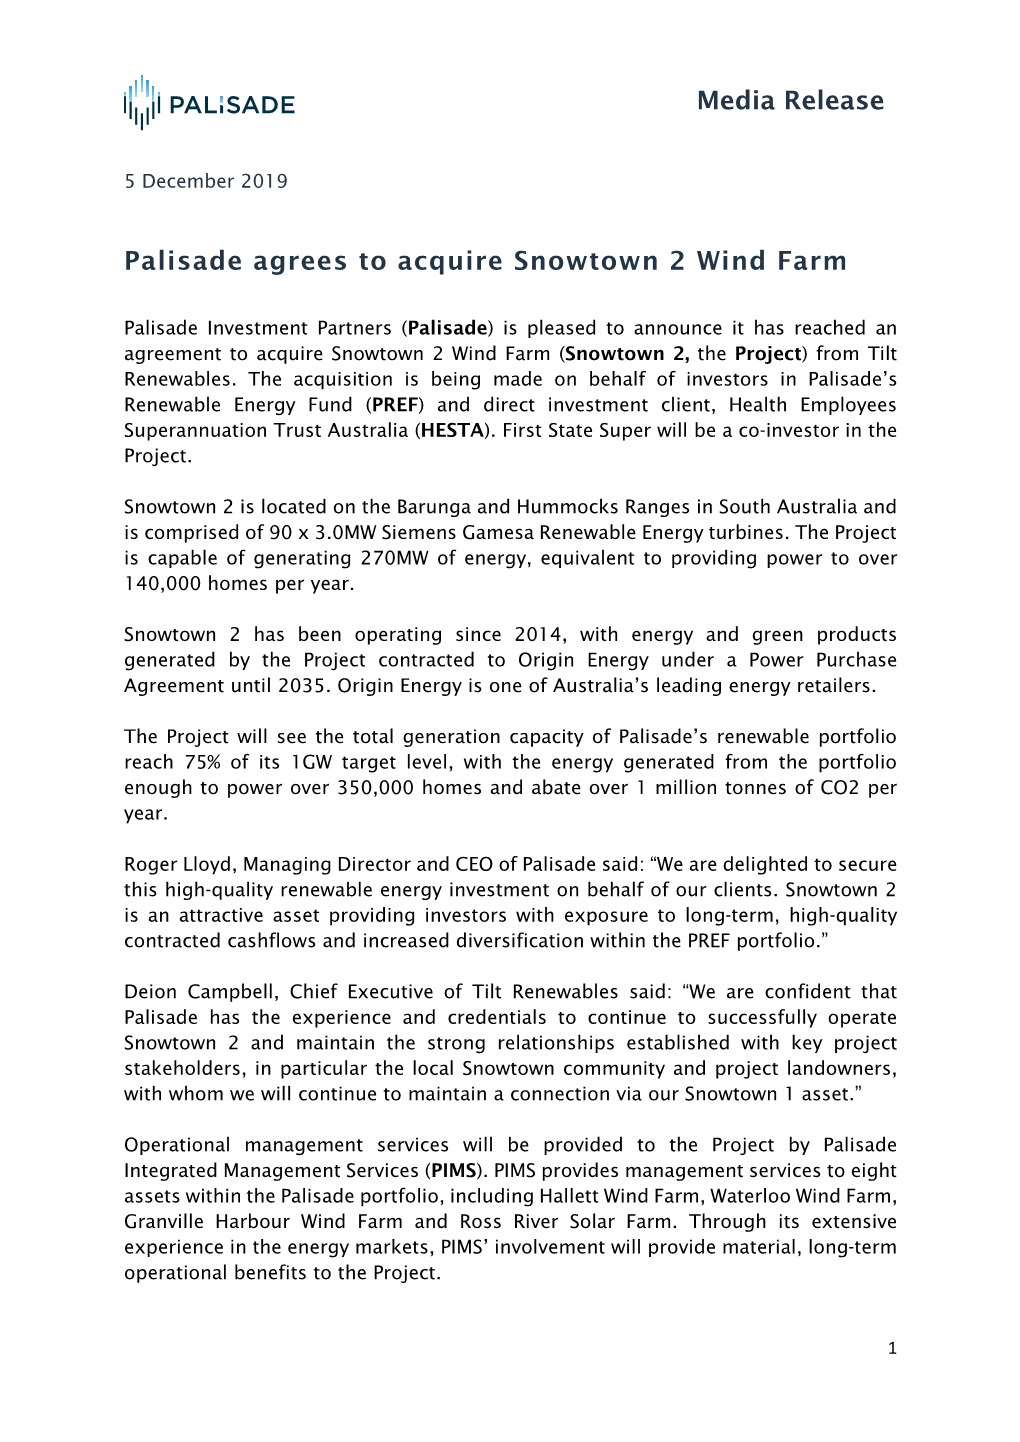 Media Release Palisade Agrees to Acquire Snowtown 2 Wind Farm